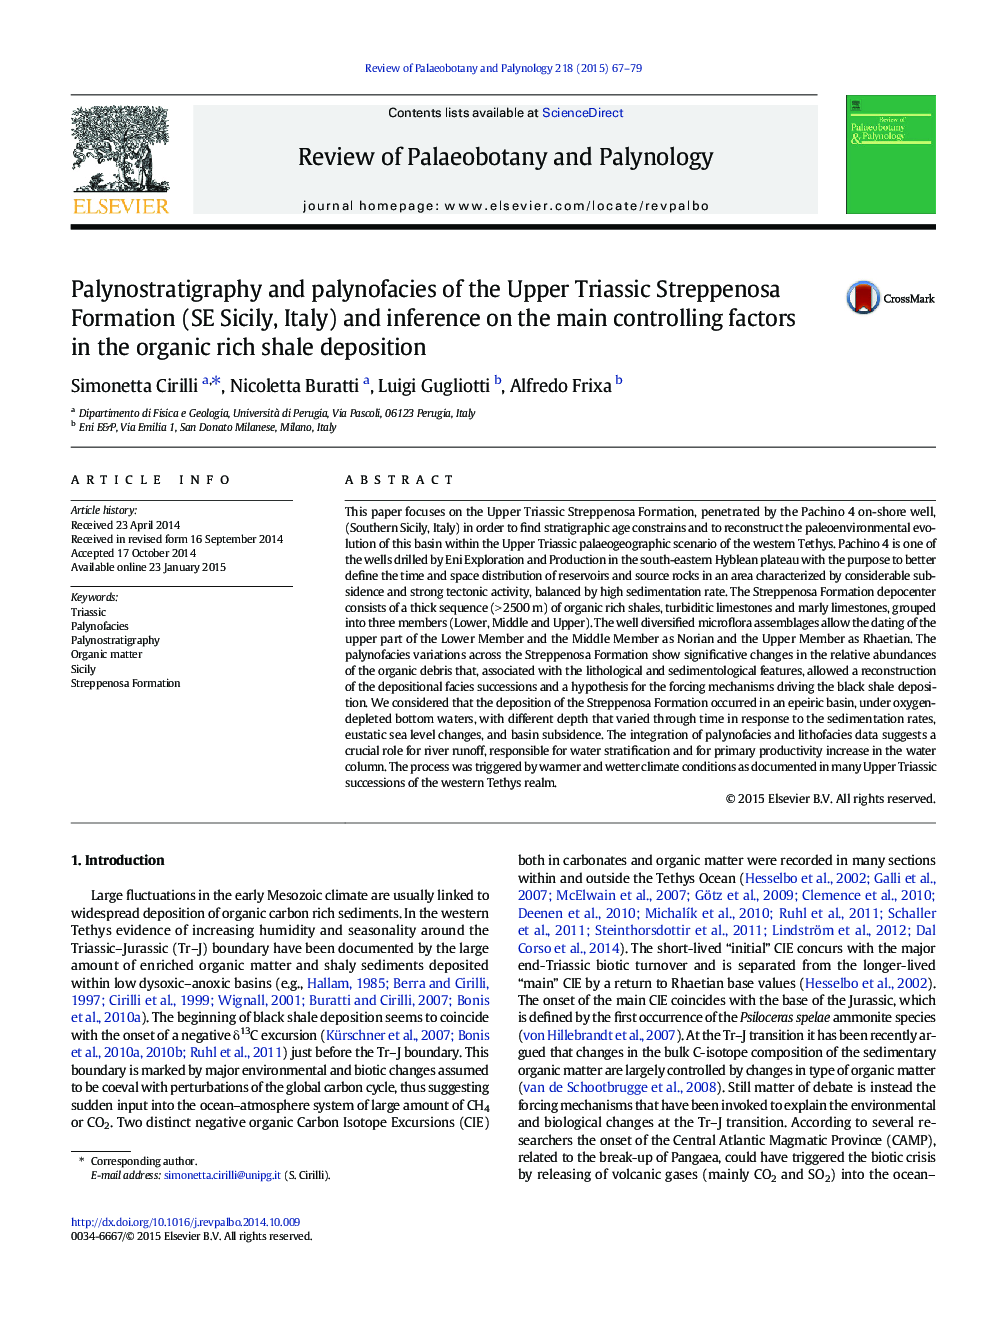 Palynostratigraphy and palynofacies of the Upper Triassic Streppenosa Formation (SE Sicily, Italy) and inference on the main controlling factors in the organic rich shale deposition